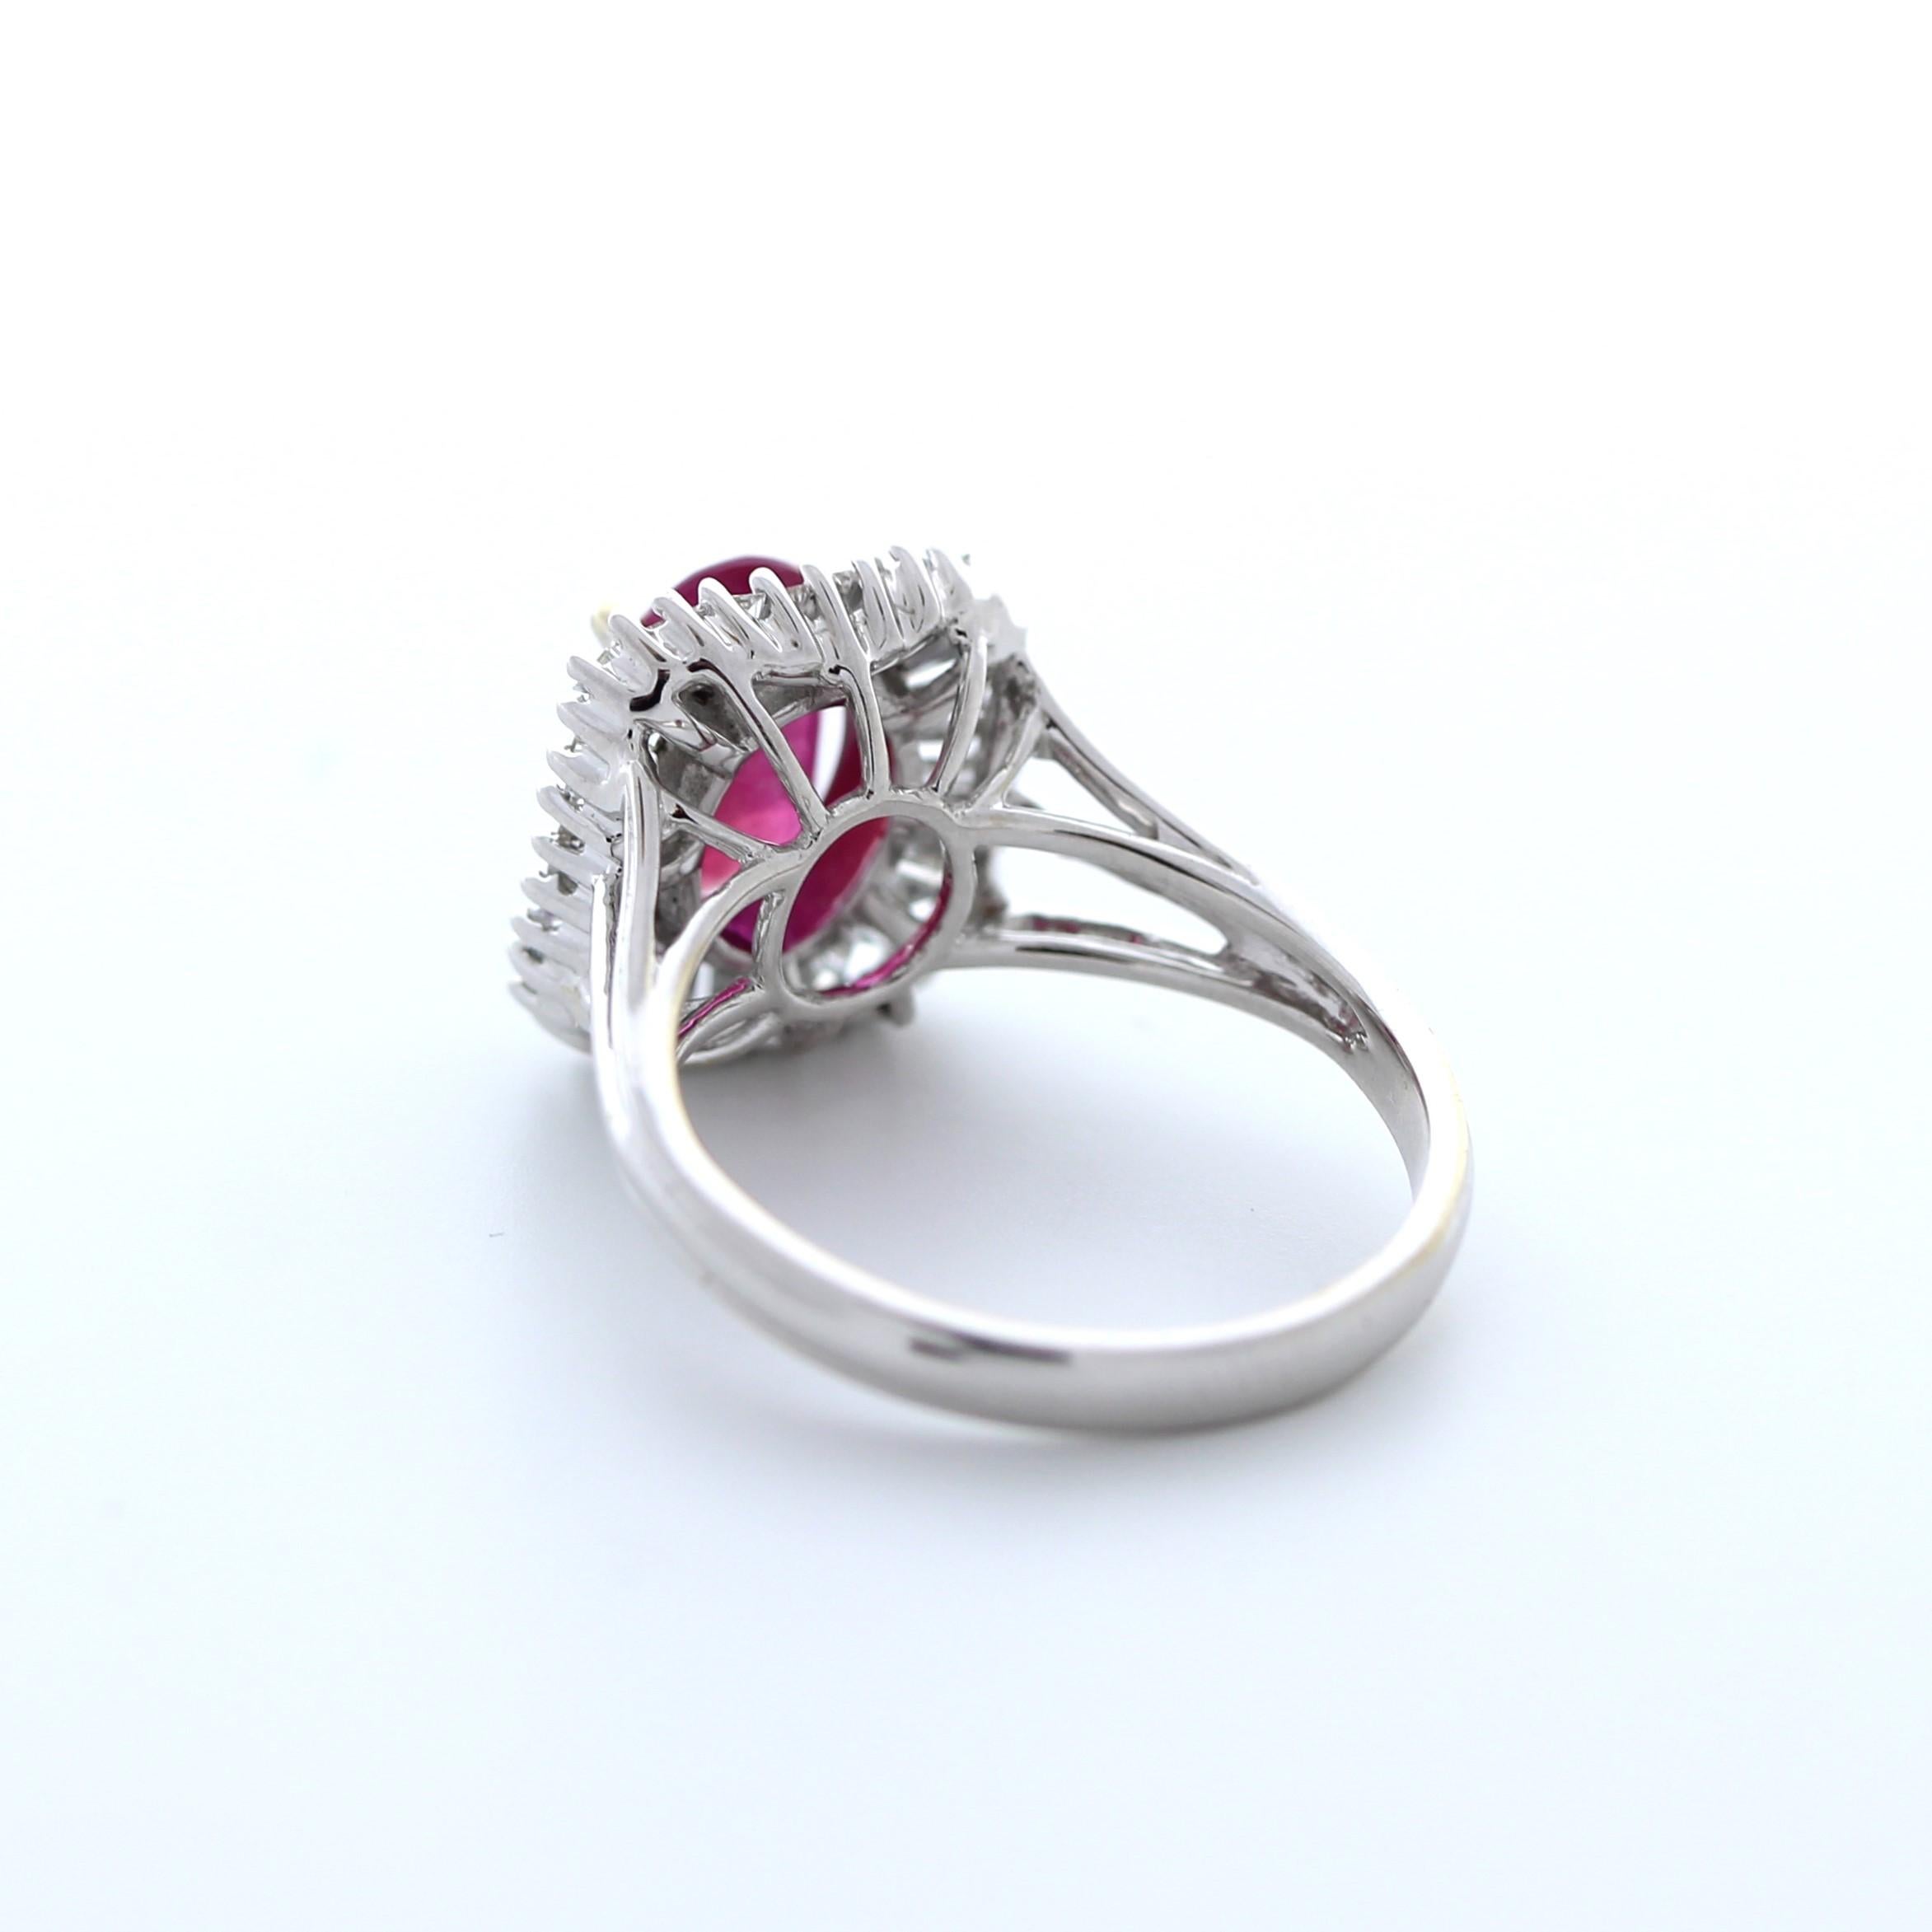 Contemporary 2.02 Carat Weight Oval Shape Ruby & Baguette Diamond Fashion Ring in 18k WG For Sale